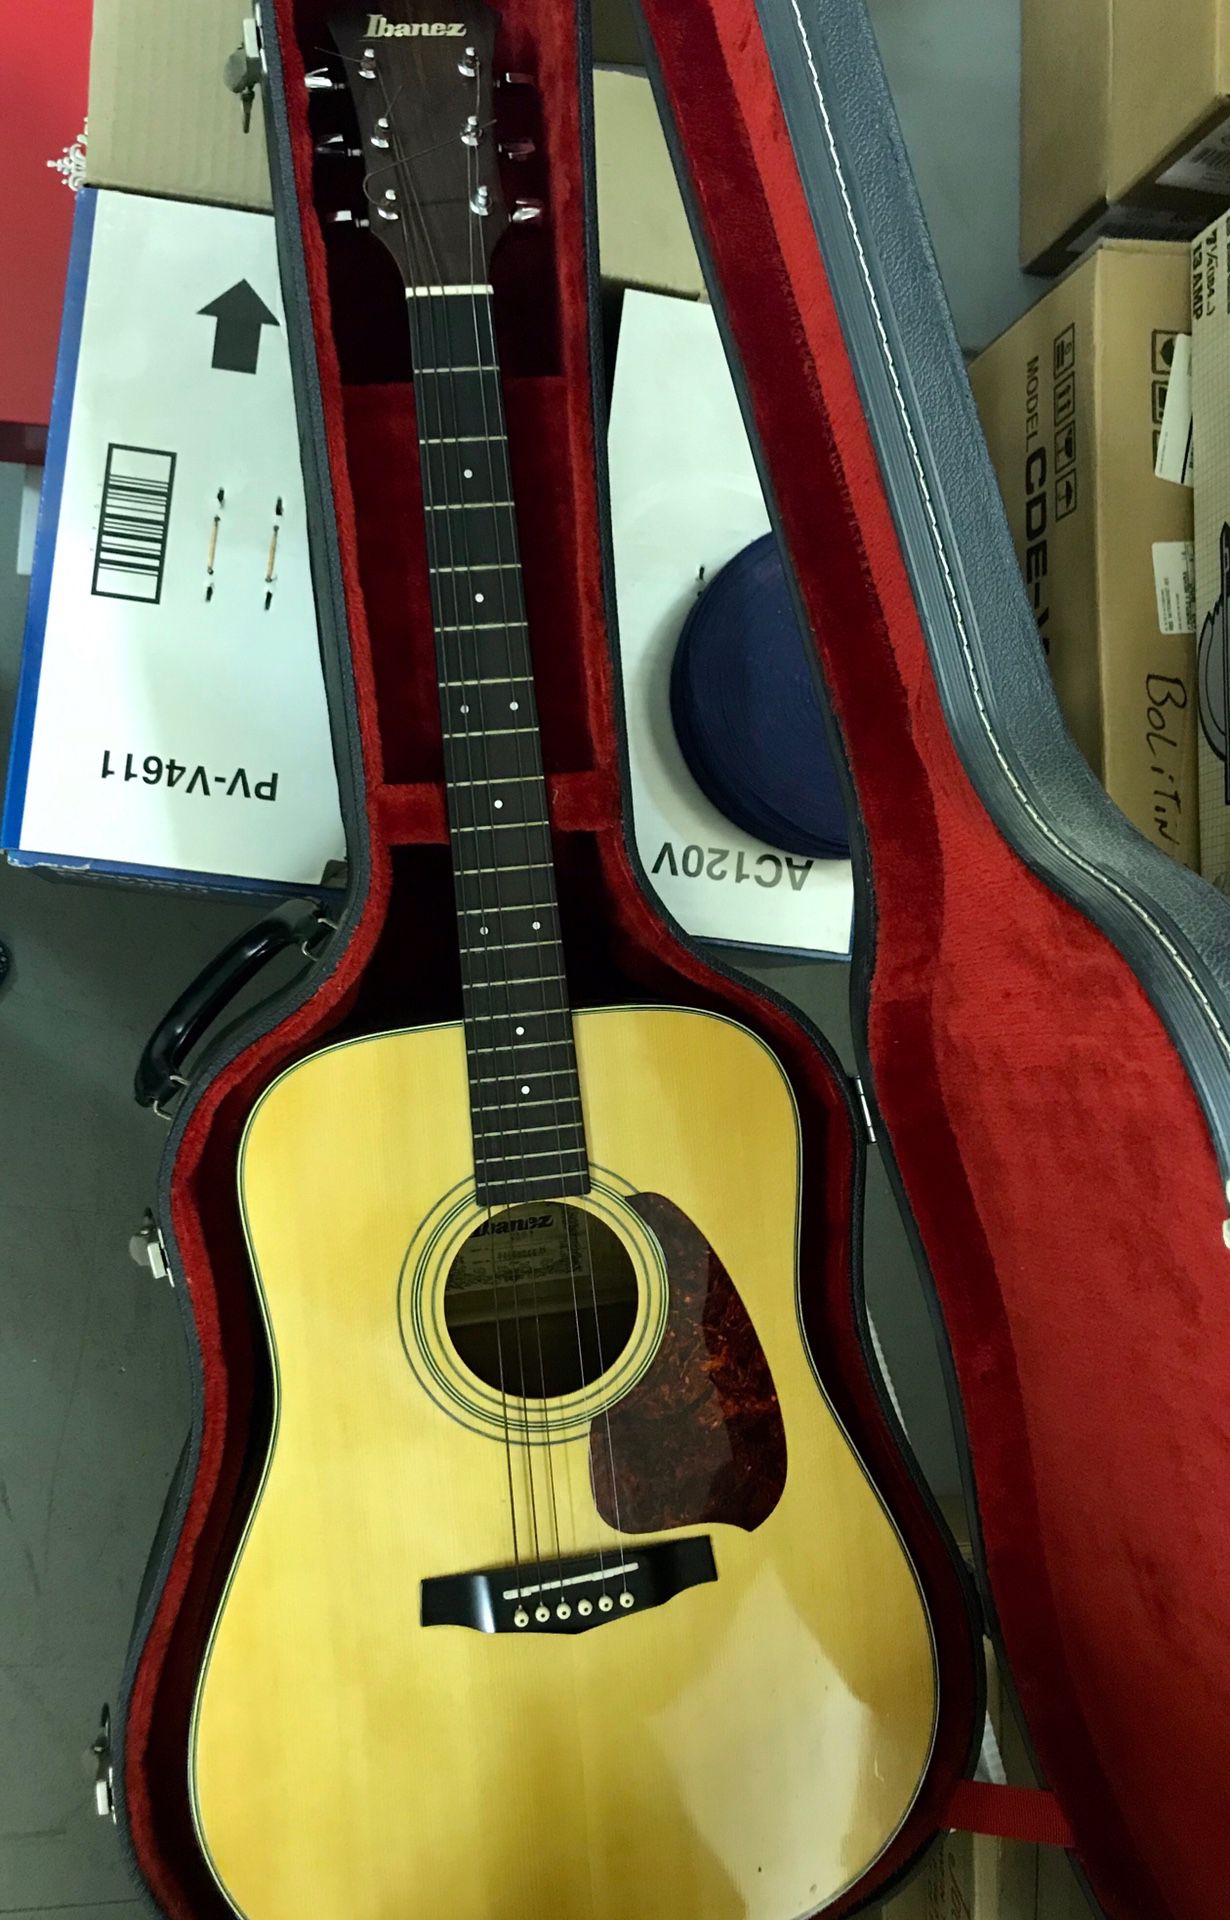 Ibanez v300 acoustic guitar with case